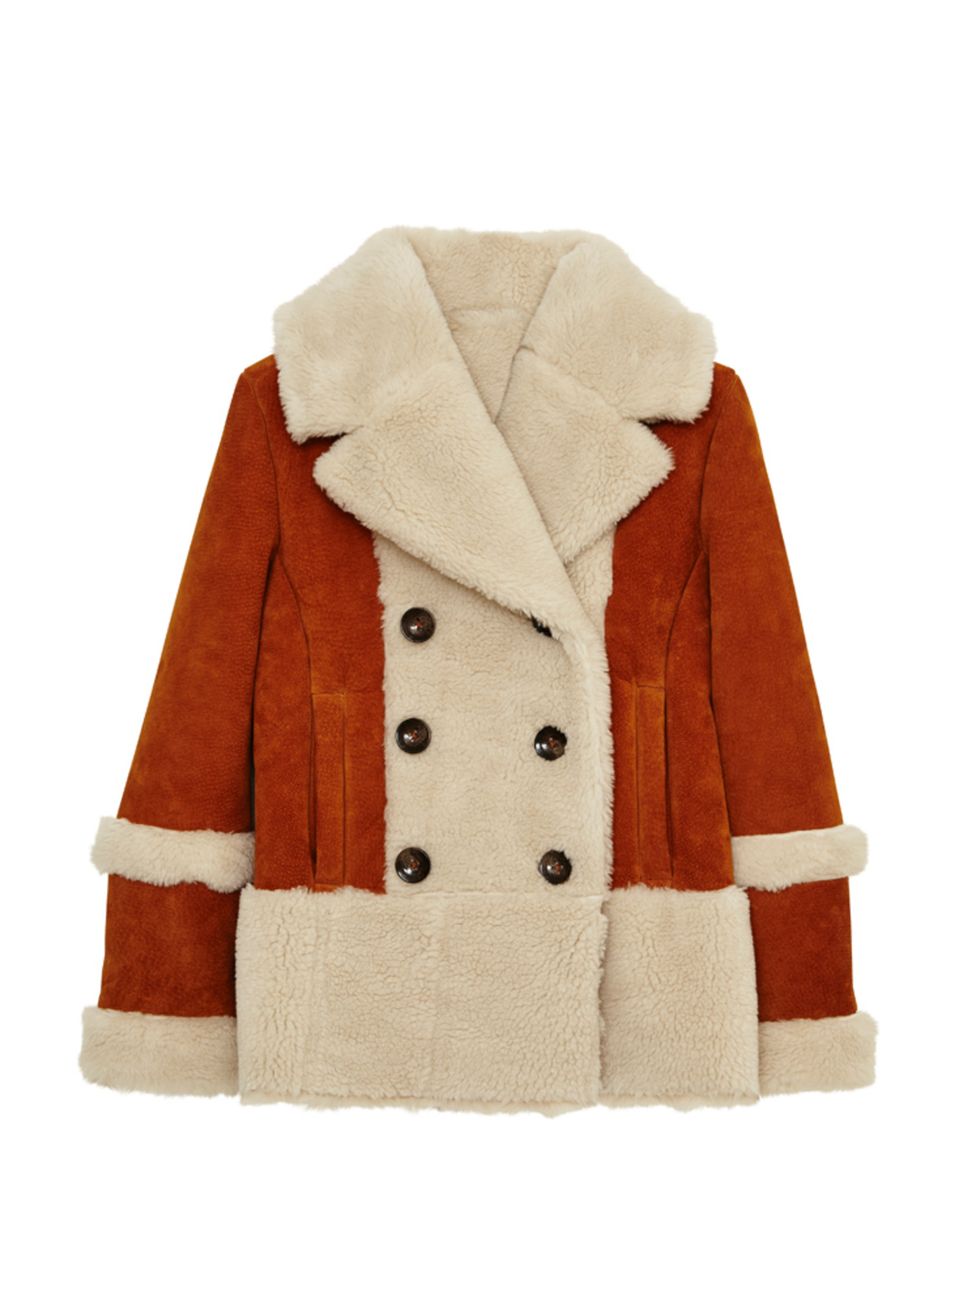 <p>Shearling coats are big news this season, snap one up early.</p>

<p><a href="http://www.asos.com/ASOS/ASOS-Suede-Shearling-Coat-in-70s-Styling/Prod/pgeproduct.aspx?iid=5263687&cid=2623&sh=0&pge=0&pgesize=36&sort=-1&clr=Tan&totalstyles=386&gridsize=3" 